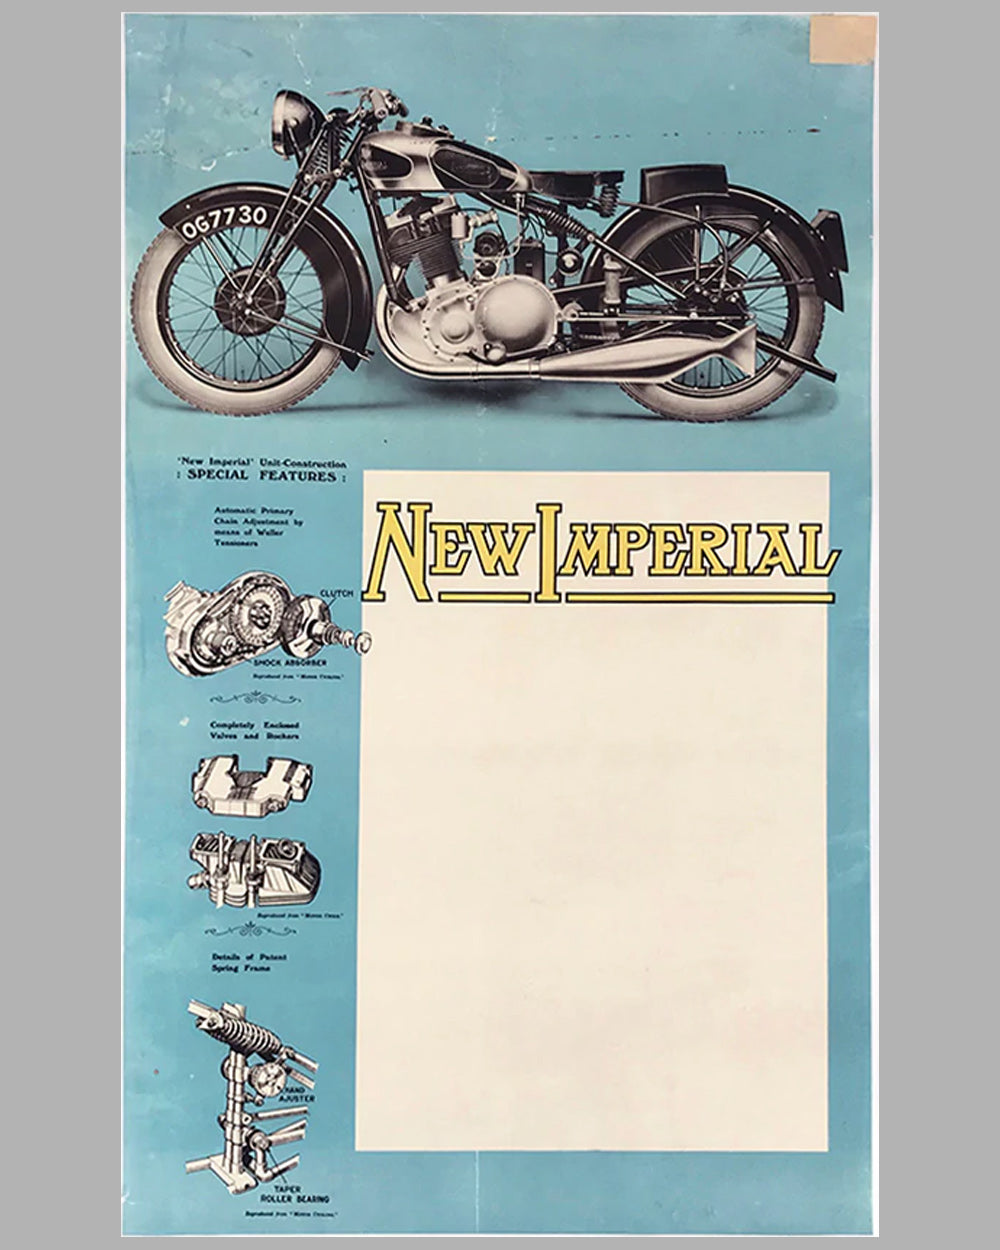 1930’s New Imperial Motorcycle Showroom Advertising Poster